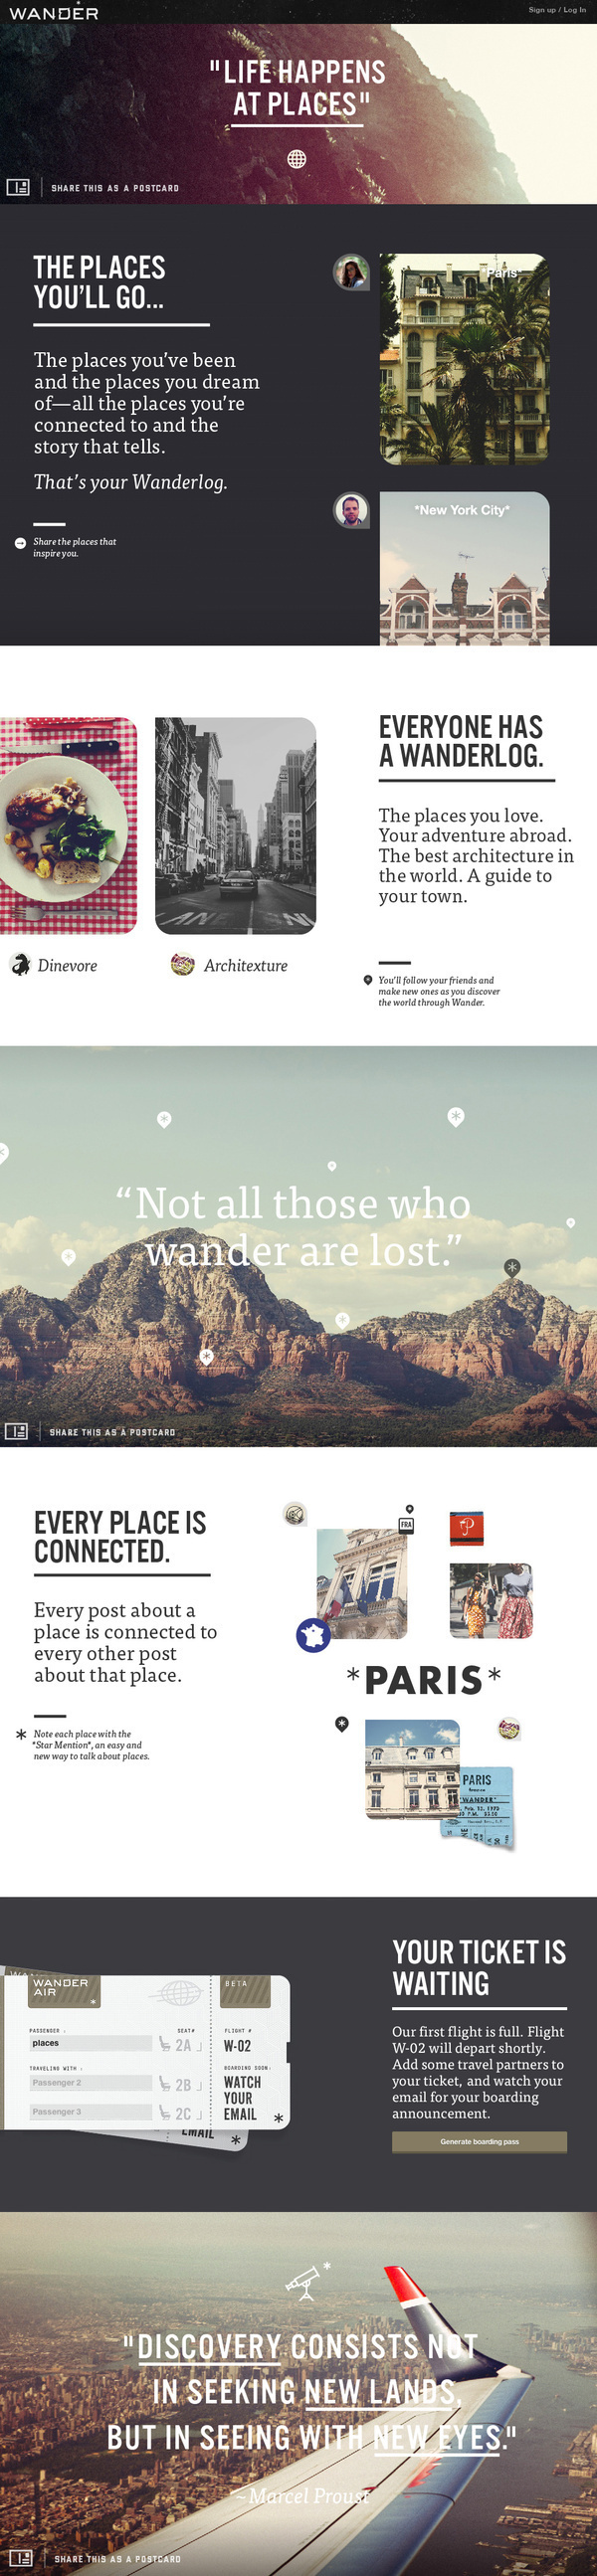 Product Page screen design idea #292: Wander Product Summary Page on Behance #website #travel